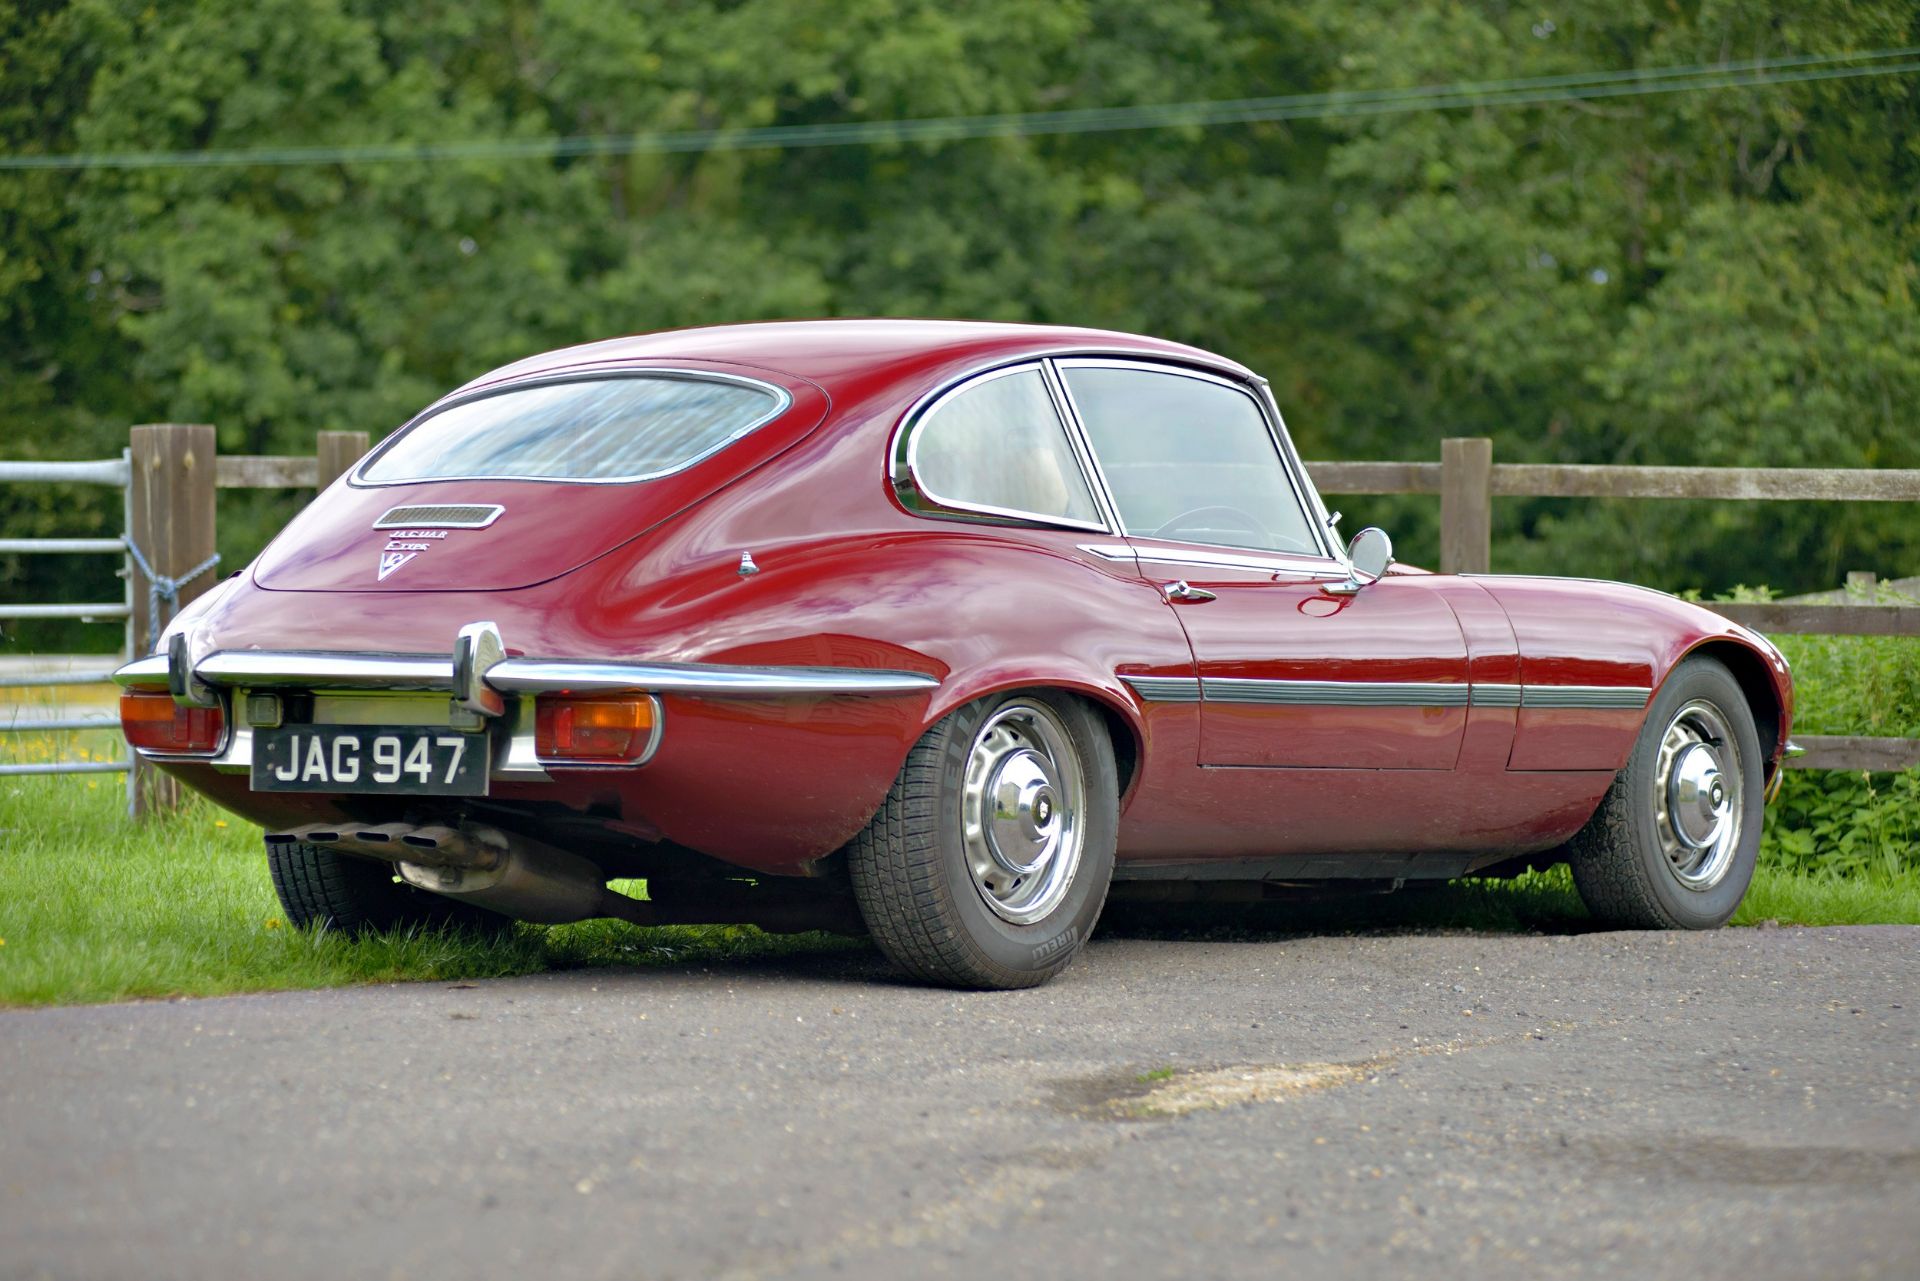 1972 JAGUAR E-TYPE SERIES III FIXED HEAD COUPE Registration: JAG 947 - Image 2 of 36